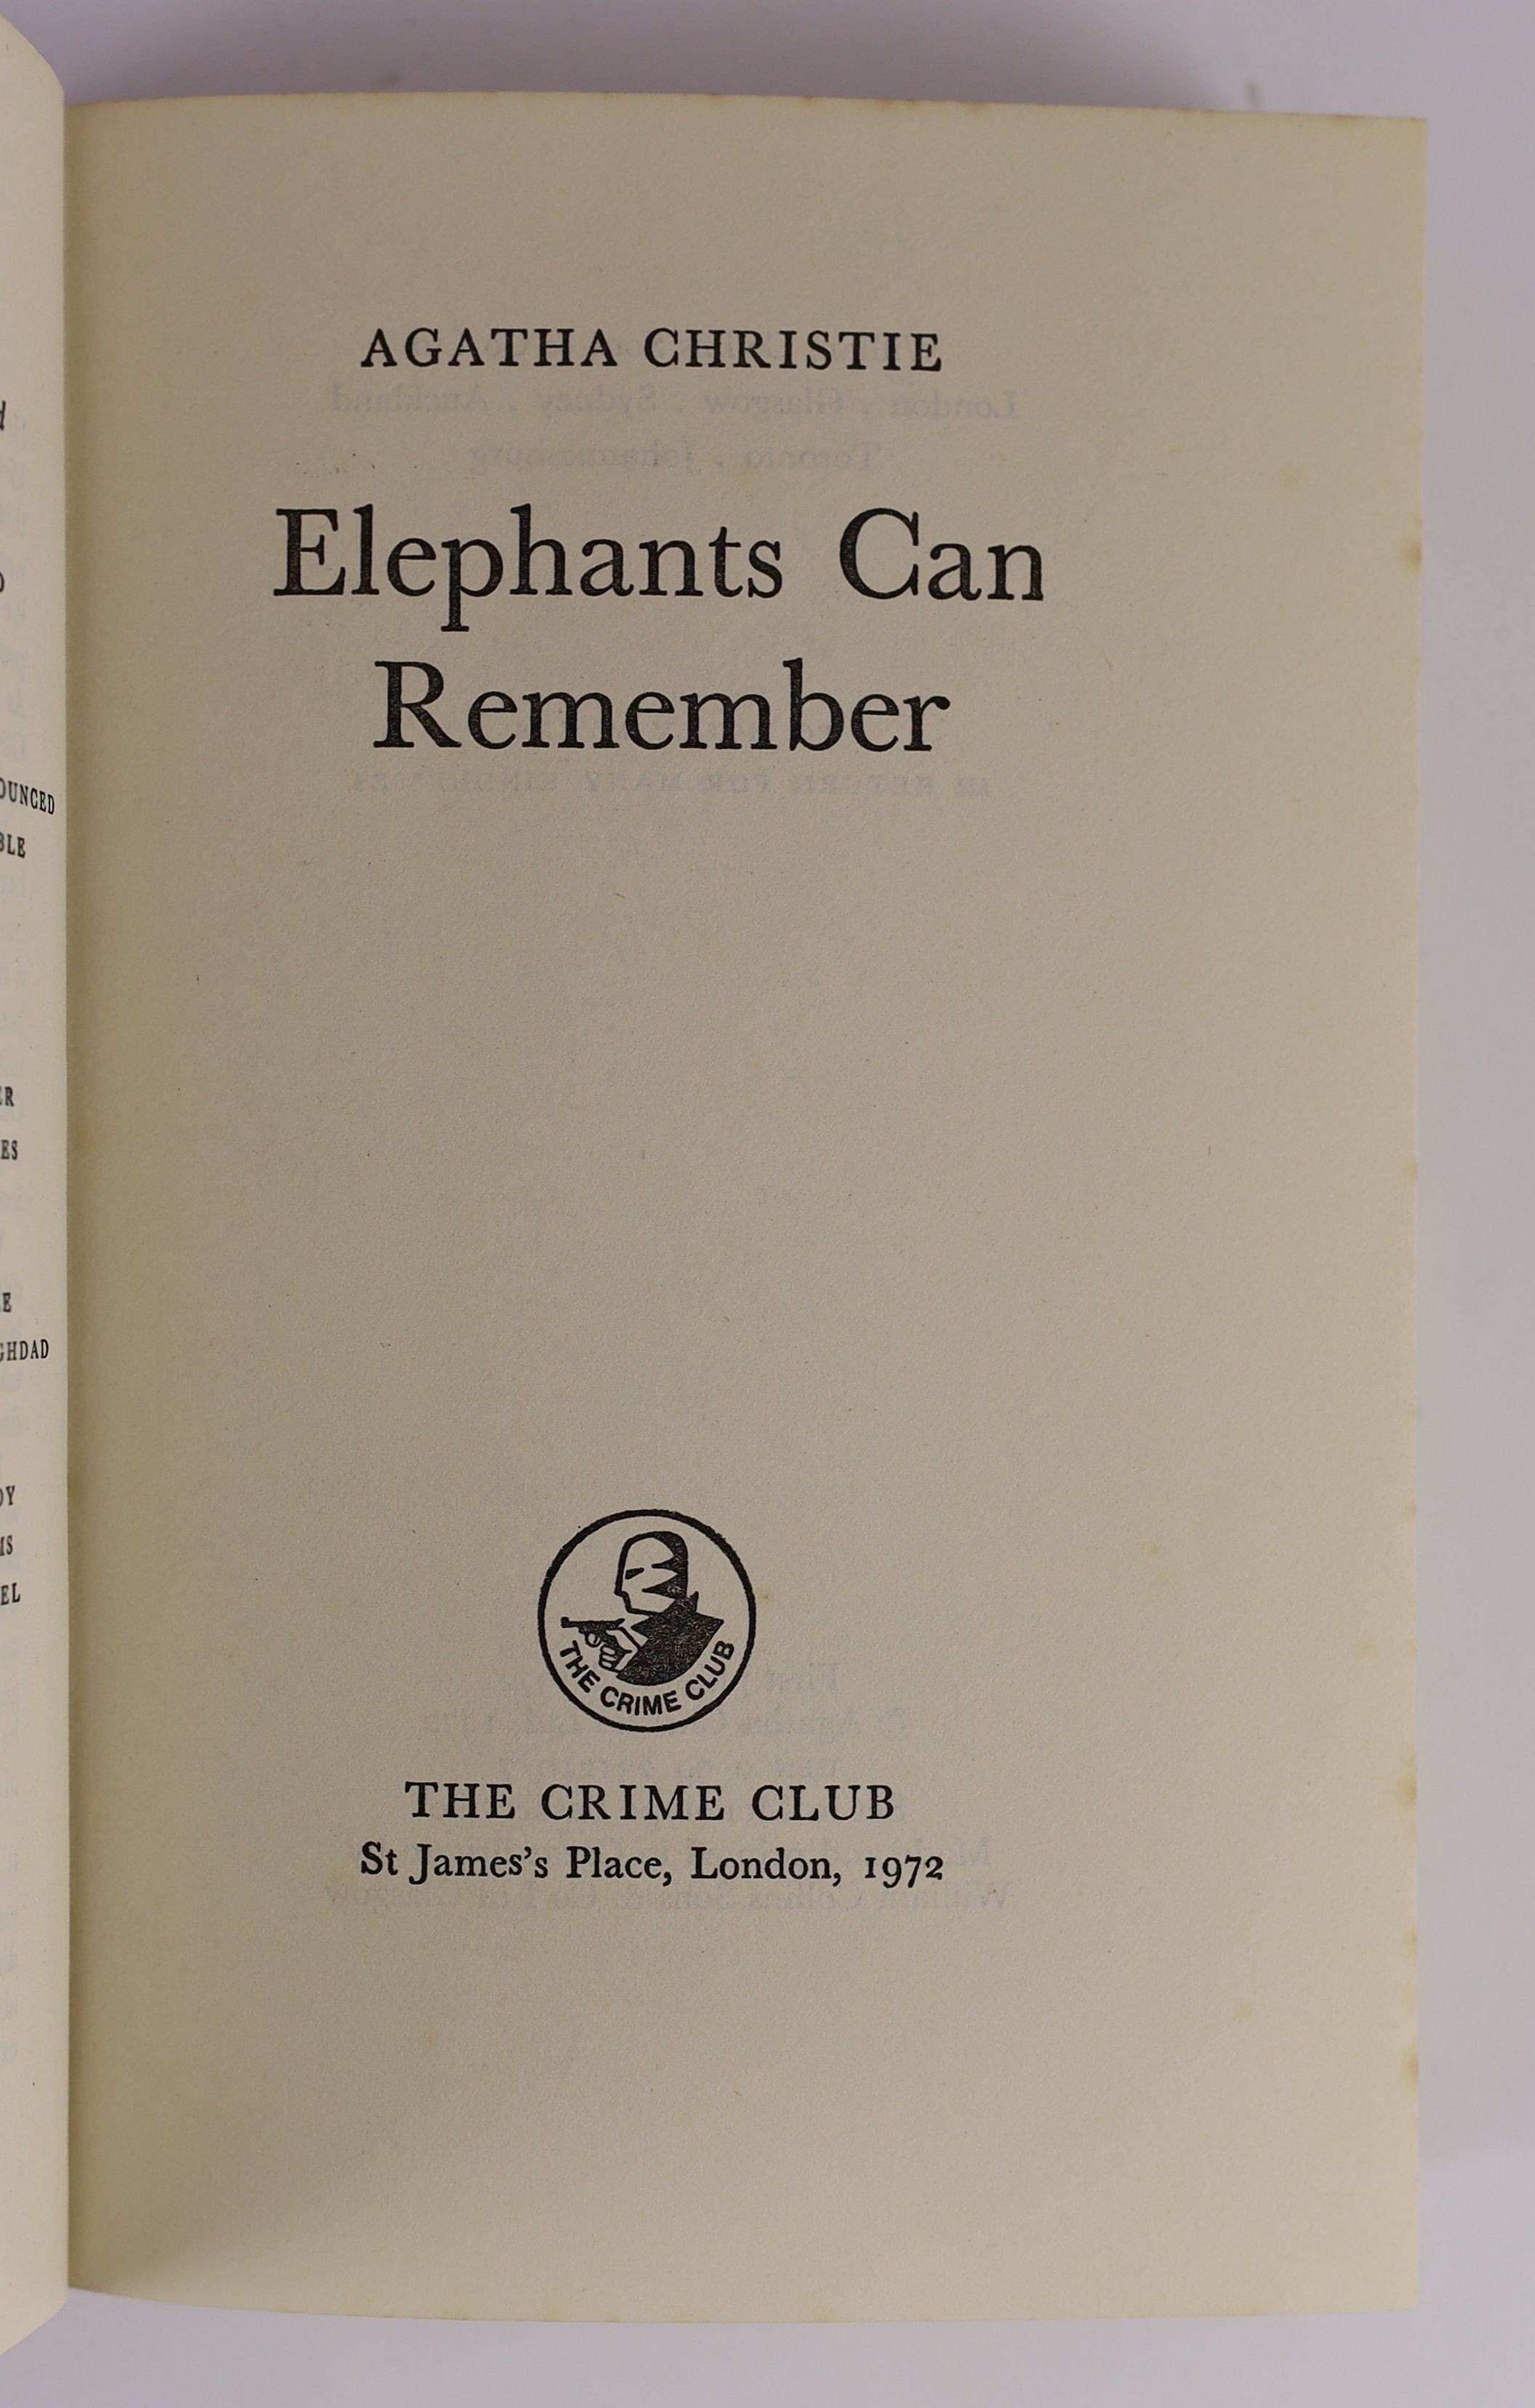 Christie, Agatha -Two works - Elephants Can Remember, 1st edition